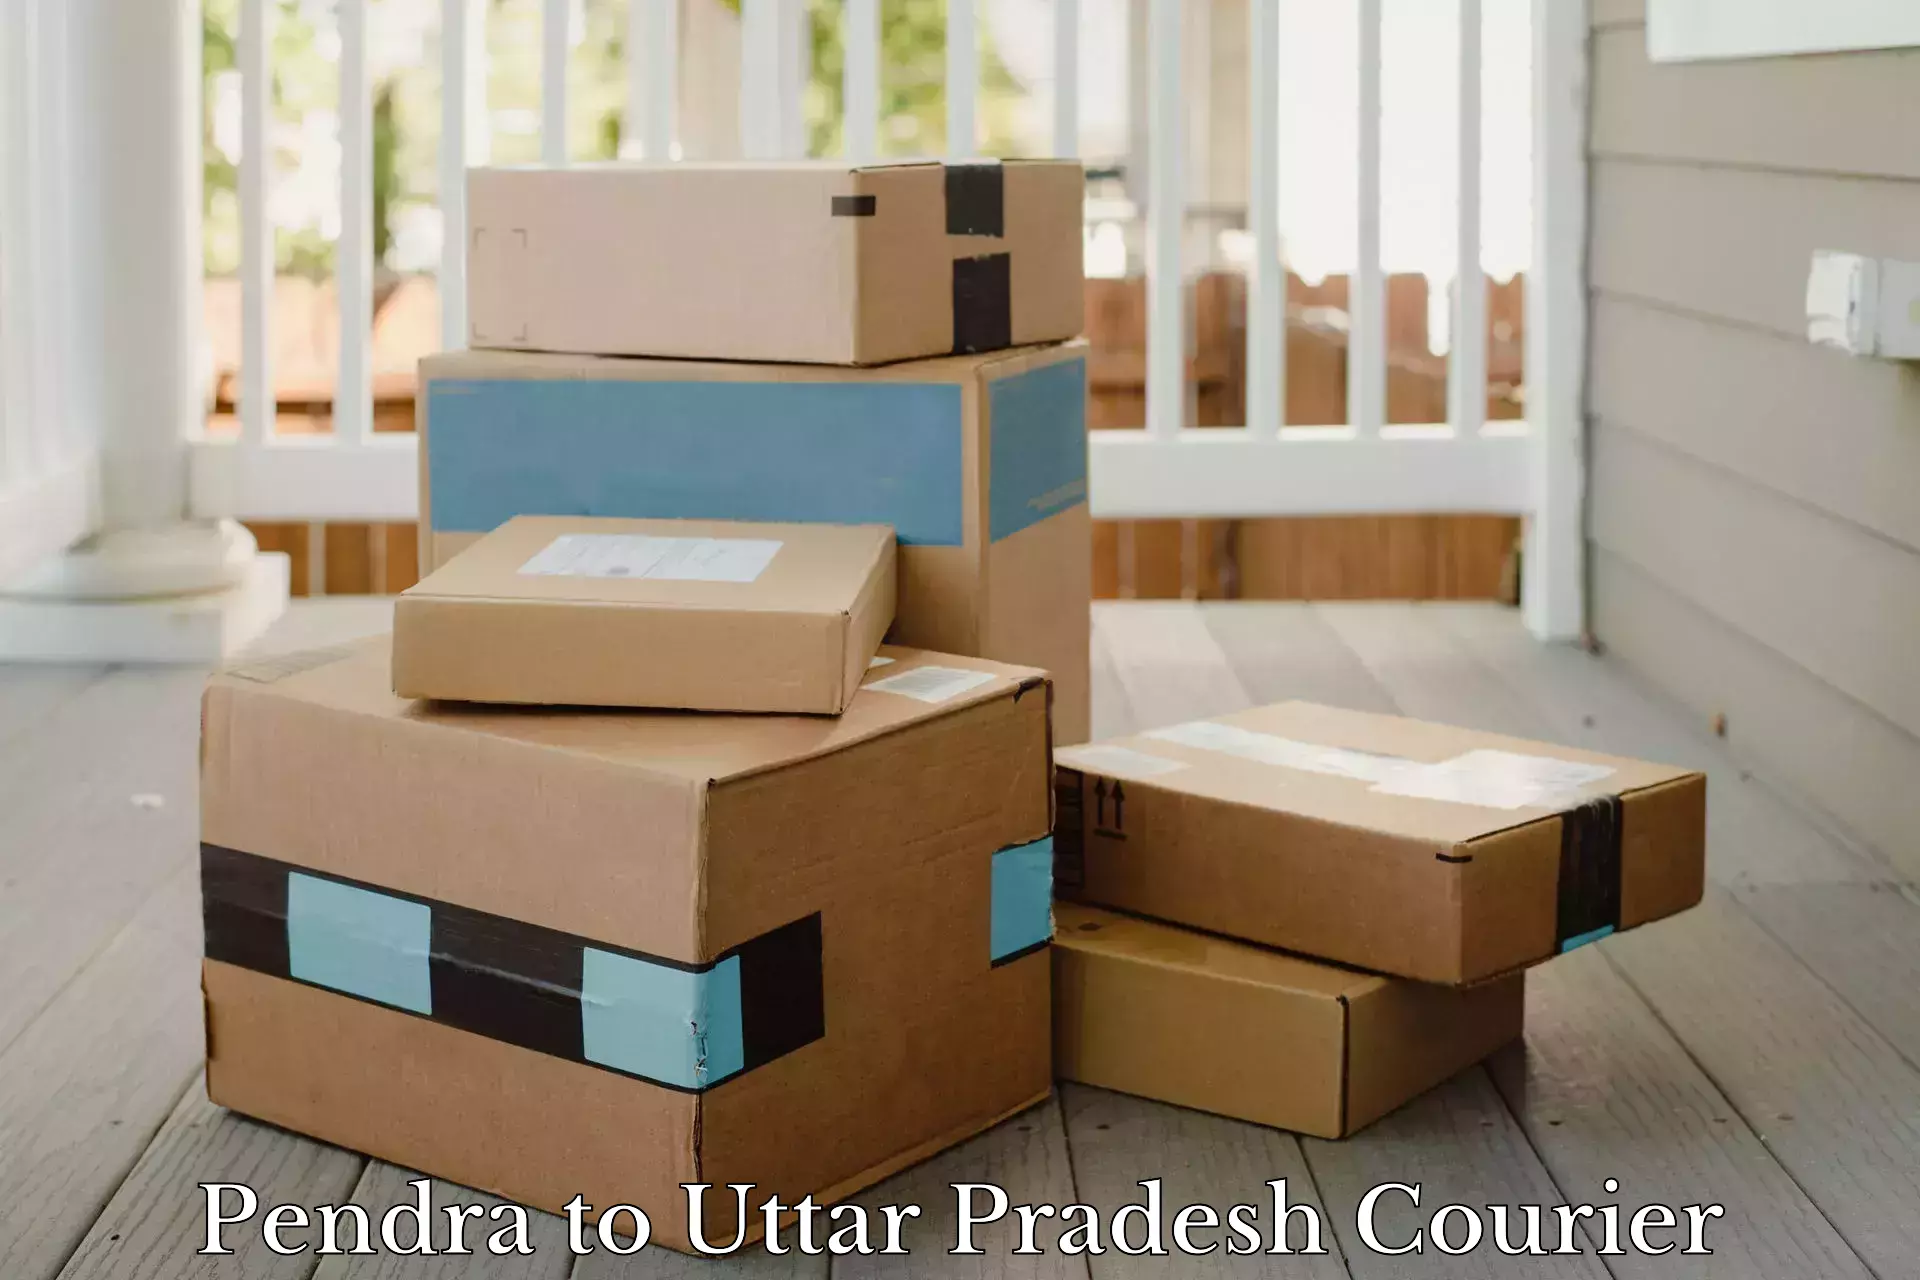 Online package tracking Pendra to Kanpur